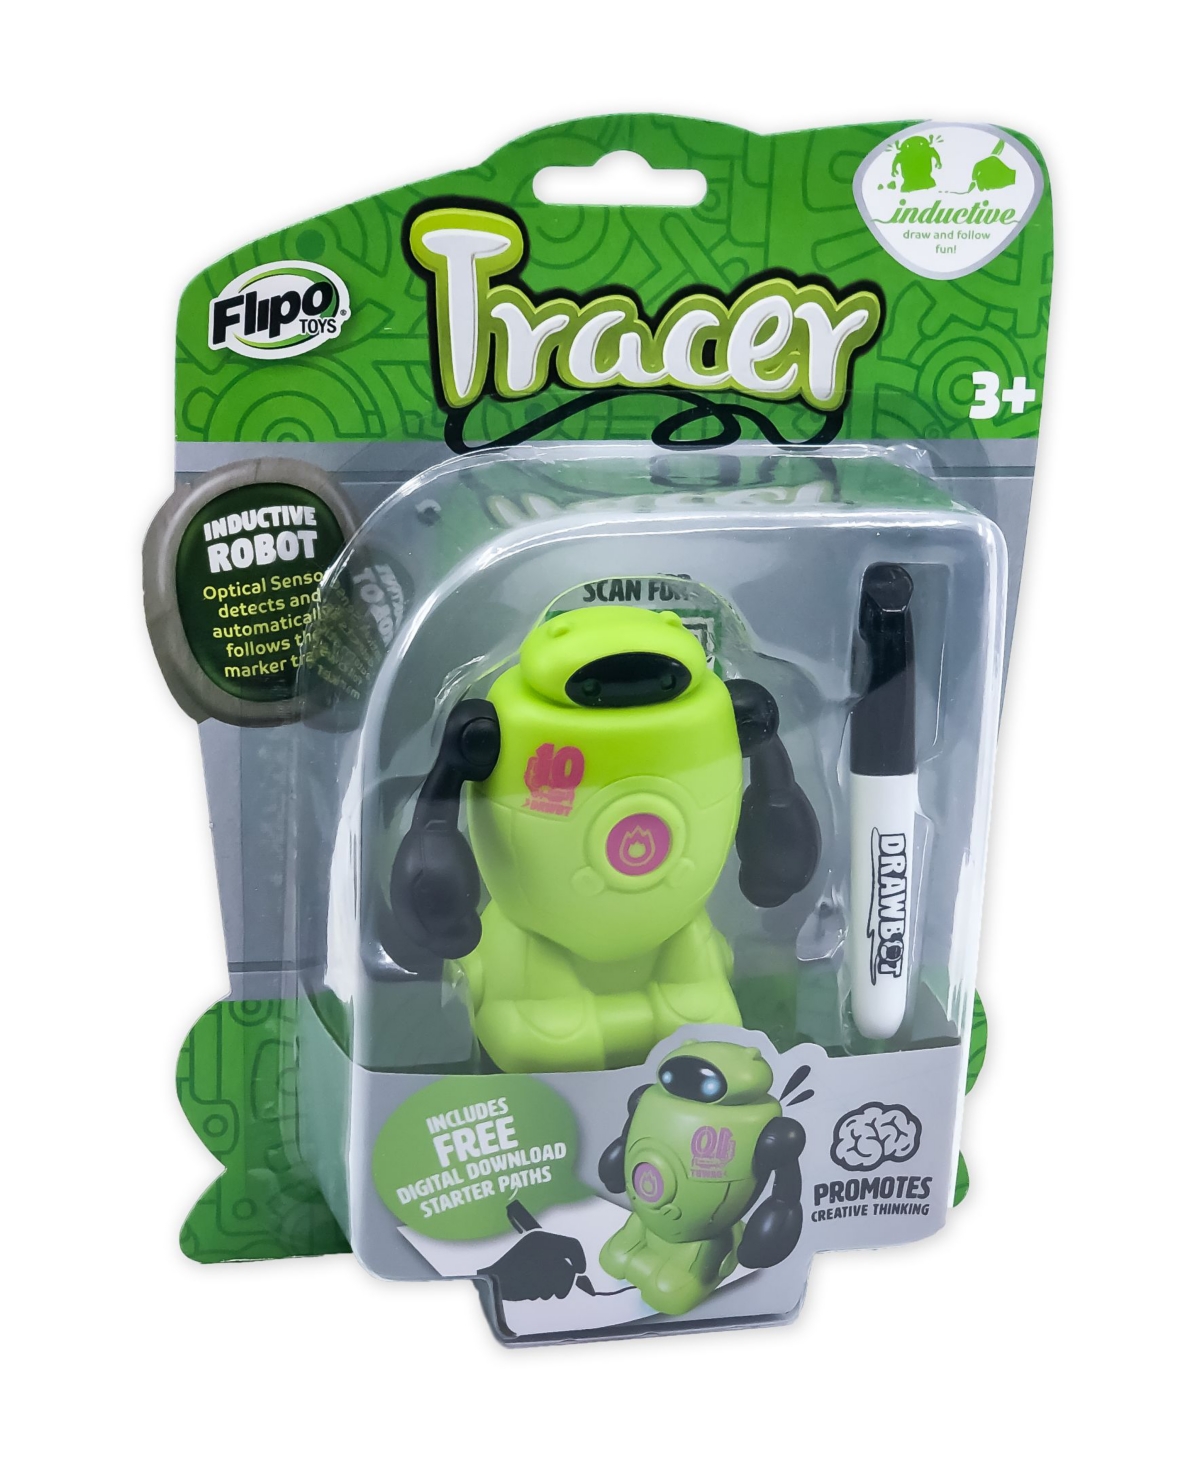 Flipo Tracer Draw Follow Robot In Green